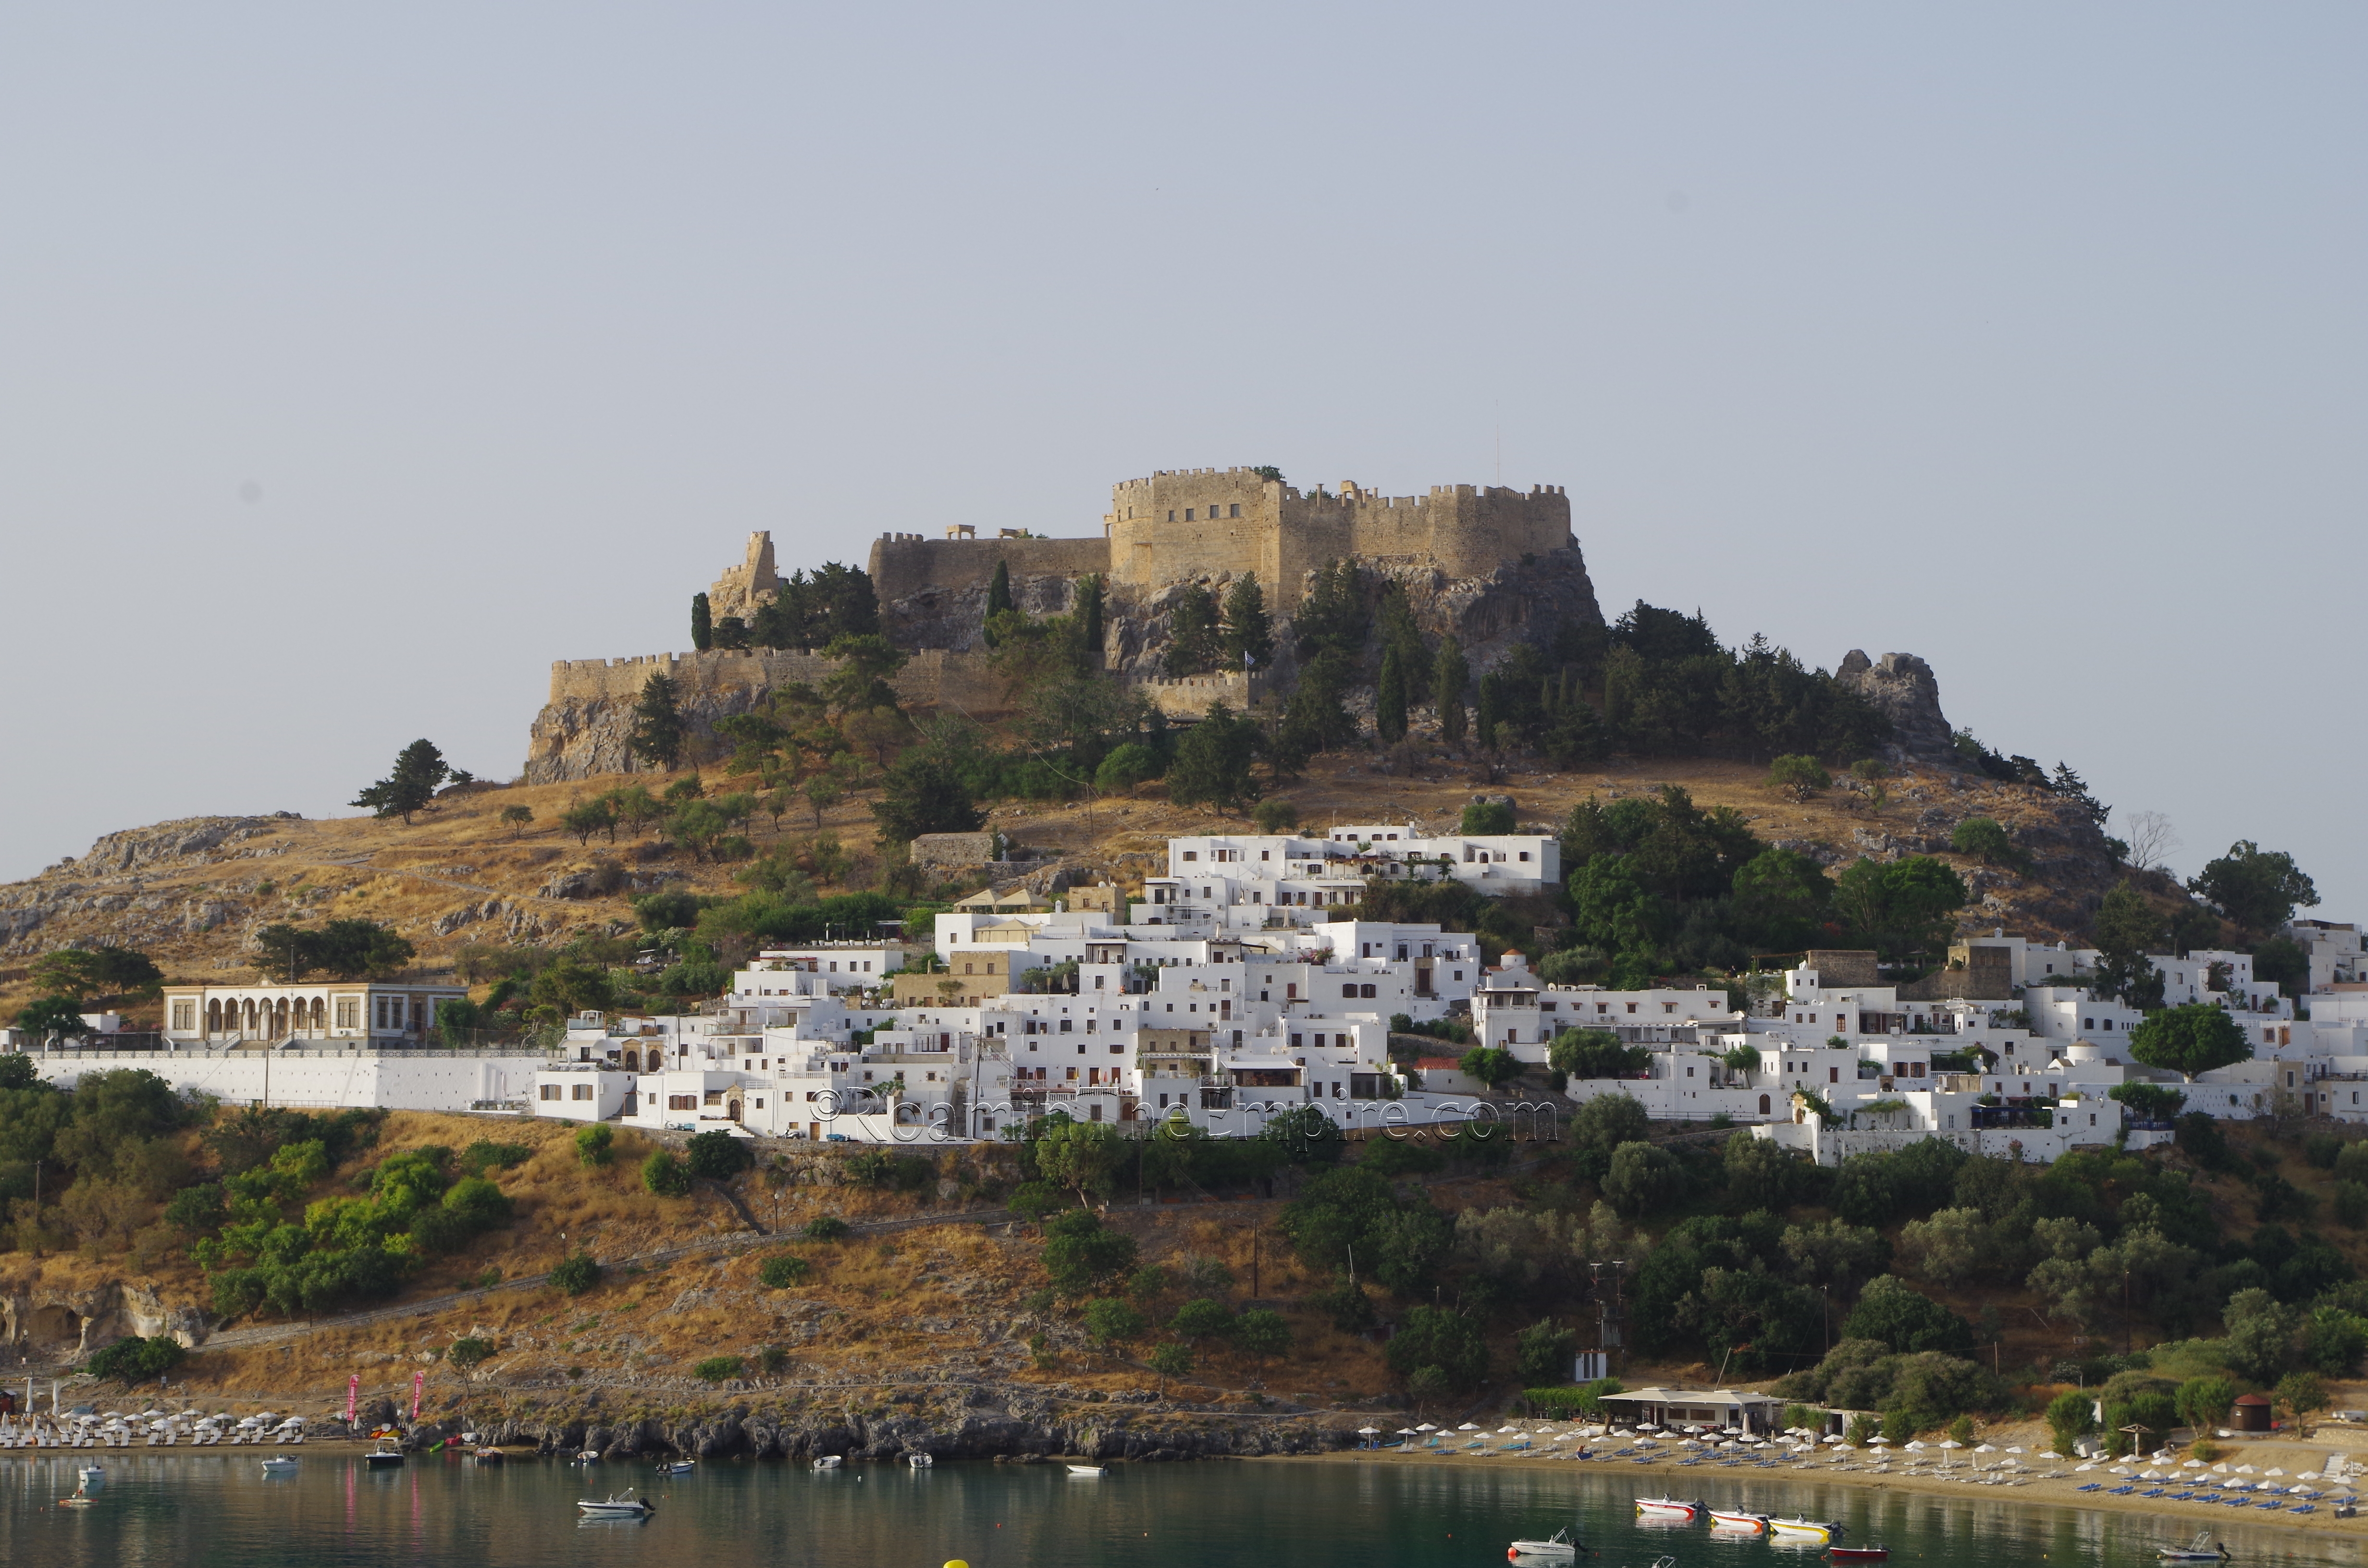 Acropolis from across the northern inlet.